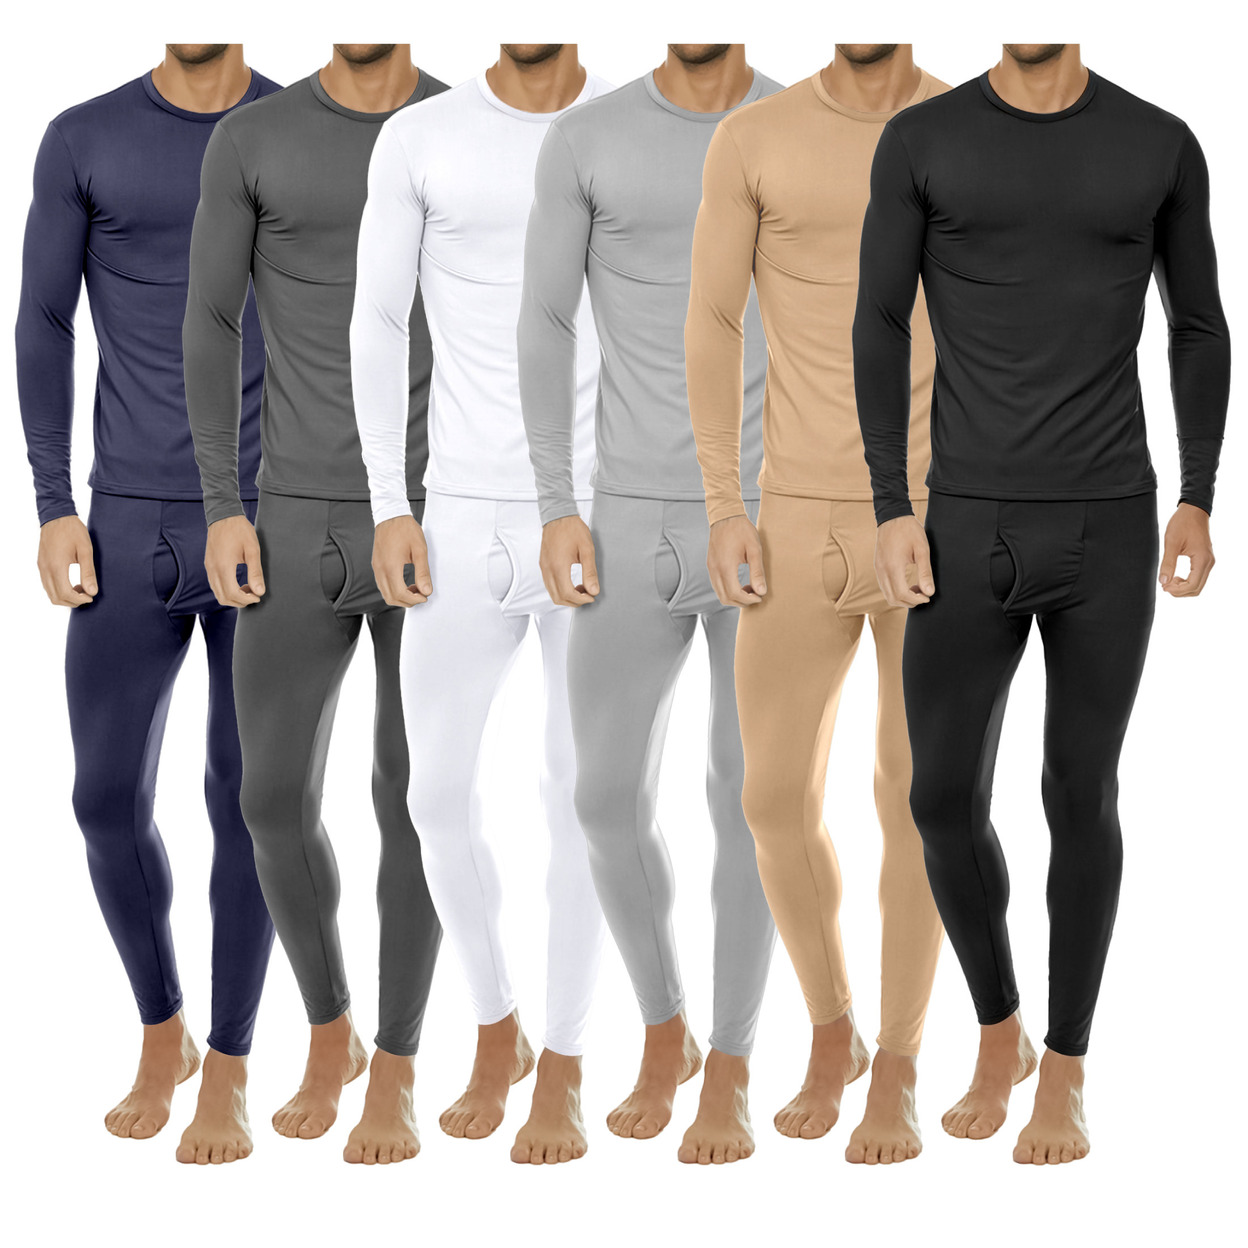 2-Pieces: Men's Winter Warm Fleece Lined Thermal Underwear Set For Cold Weather - Tan, X-large